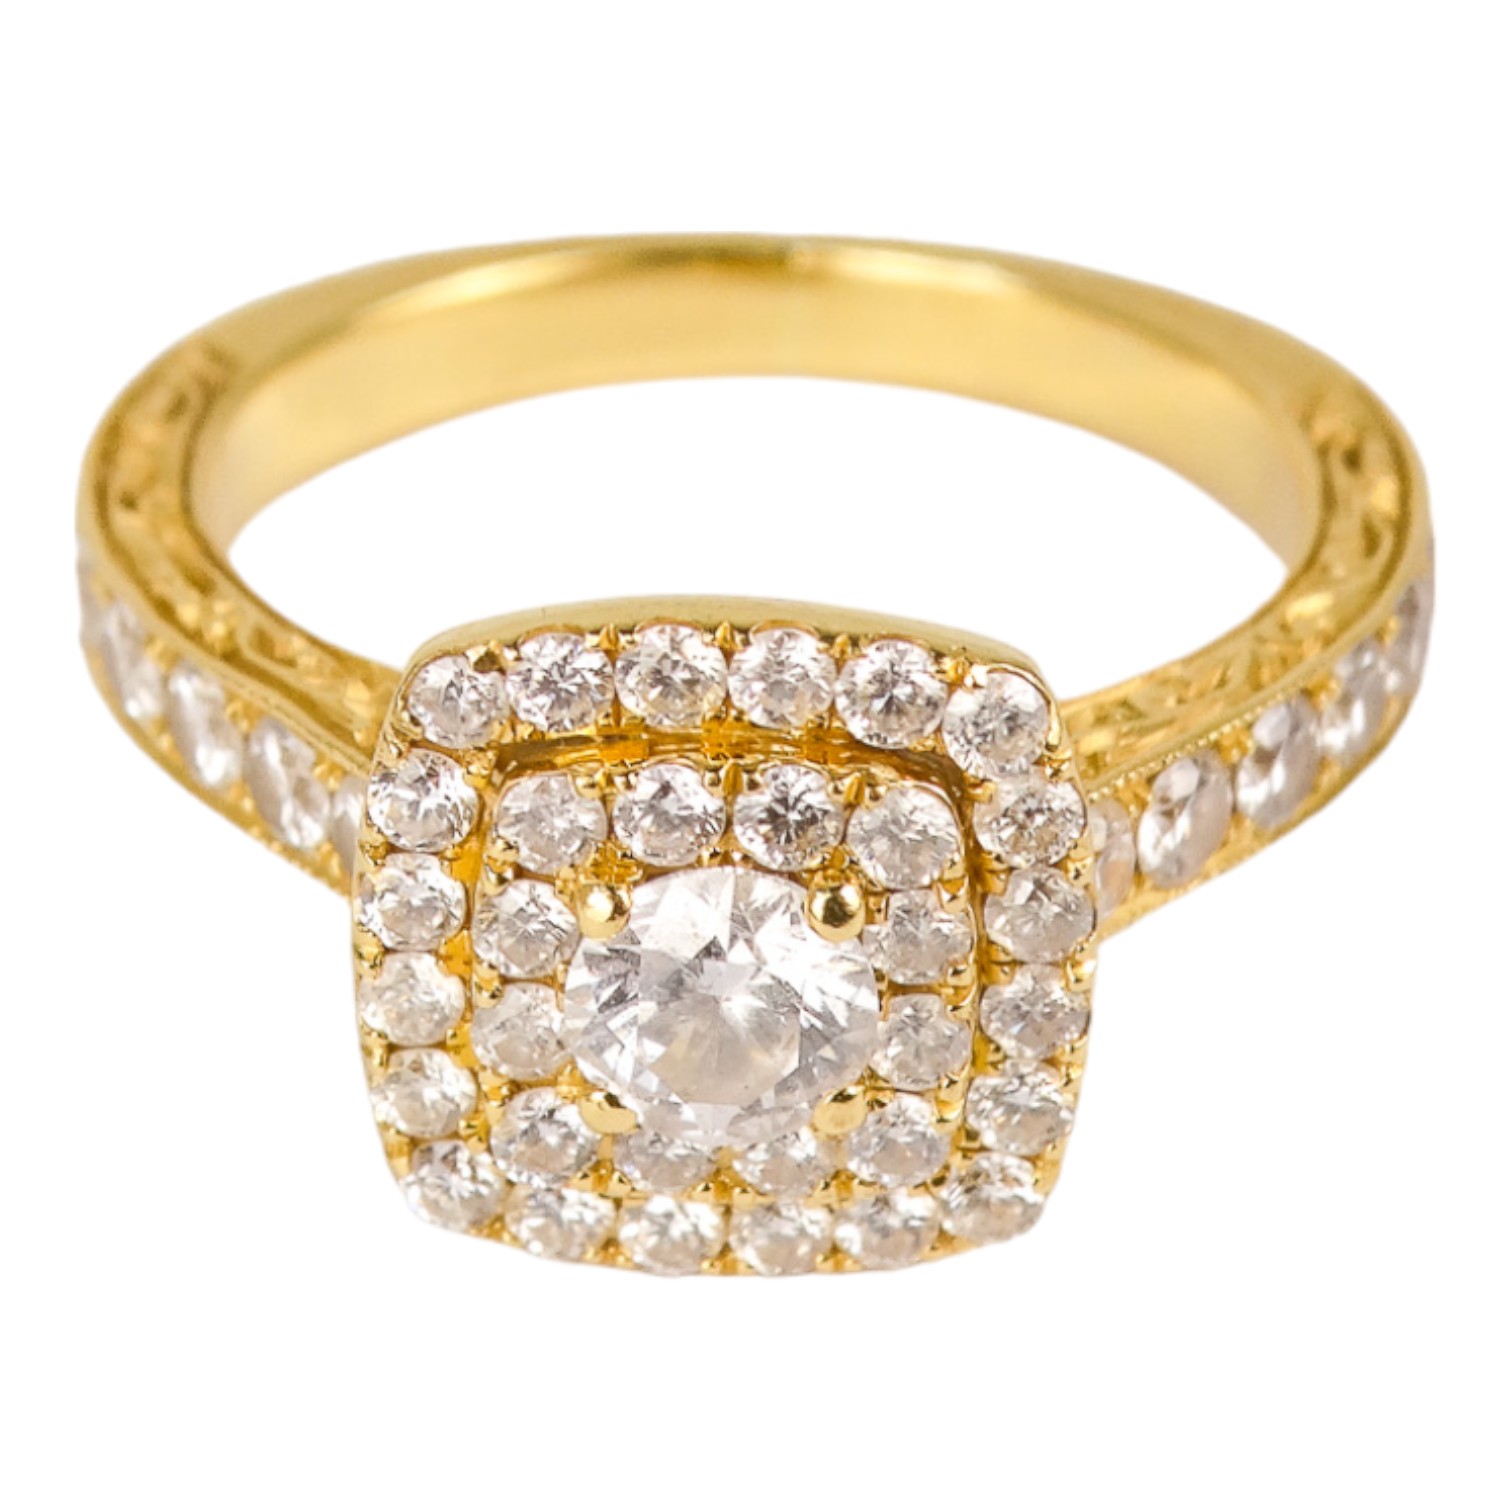 A Tiffany 18ct yellow gold and diamond ring - size L, weight 5.7g. - Image 2 of 4